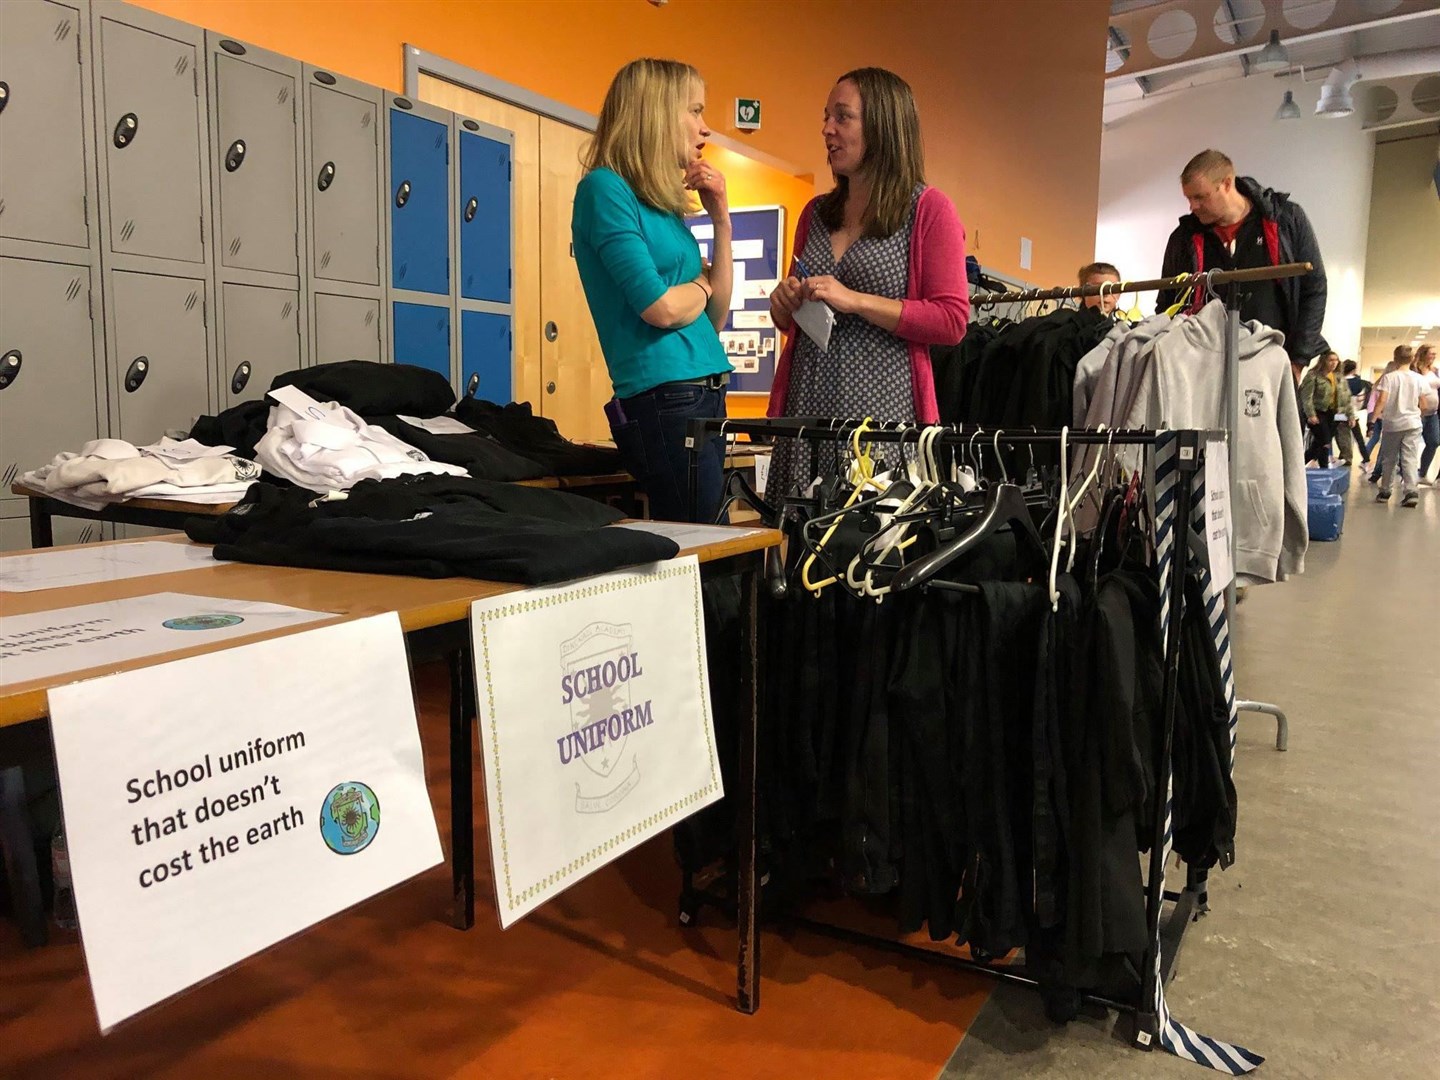 School uniform doesn't have to cost the earth: that was the message at a pop-up shop recycling pre-owned clothes. Could the same be true for Christmas gifts?